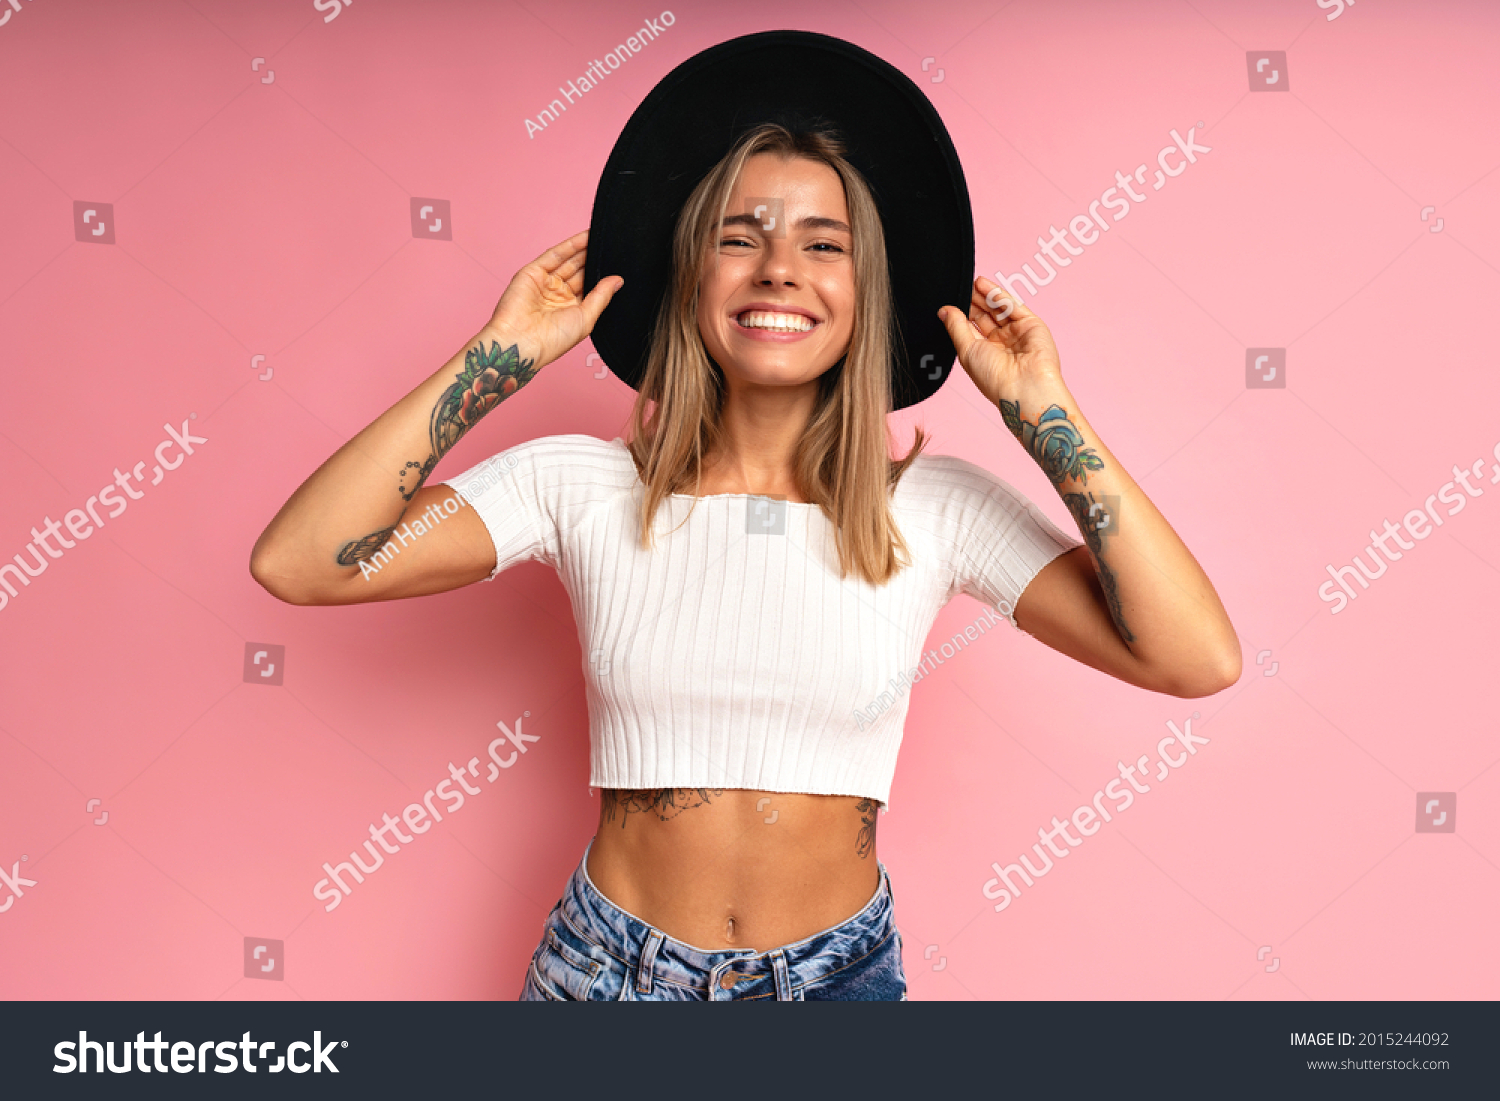 Cheerful stylish woman posing at studio pink background, wearing crop top blue jeans, black fedora. Blonde hairs and tattos. #2015244092